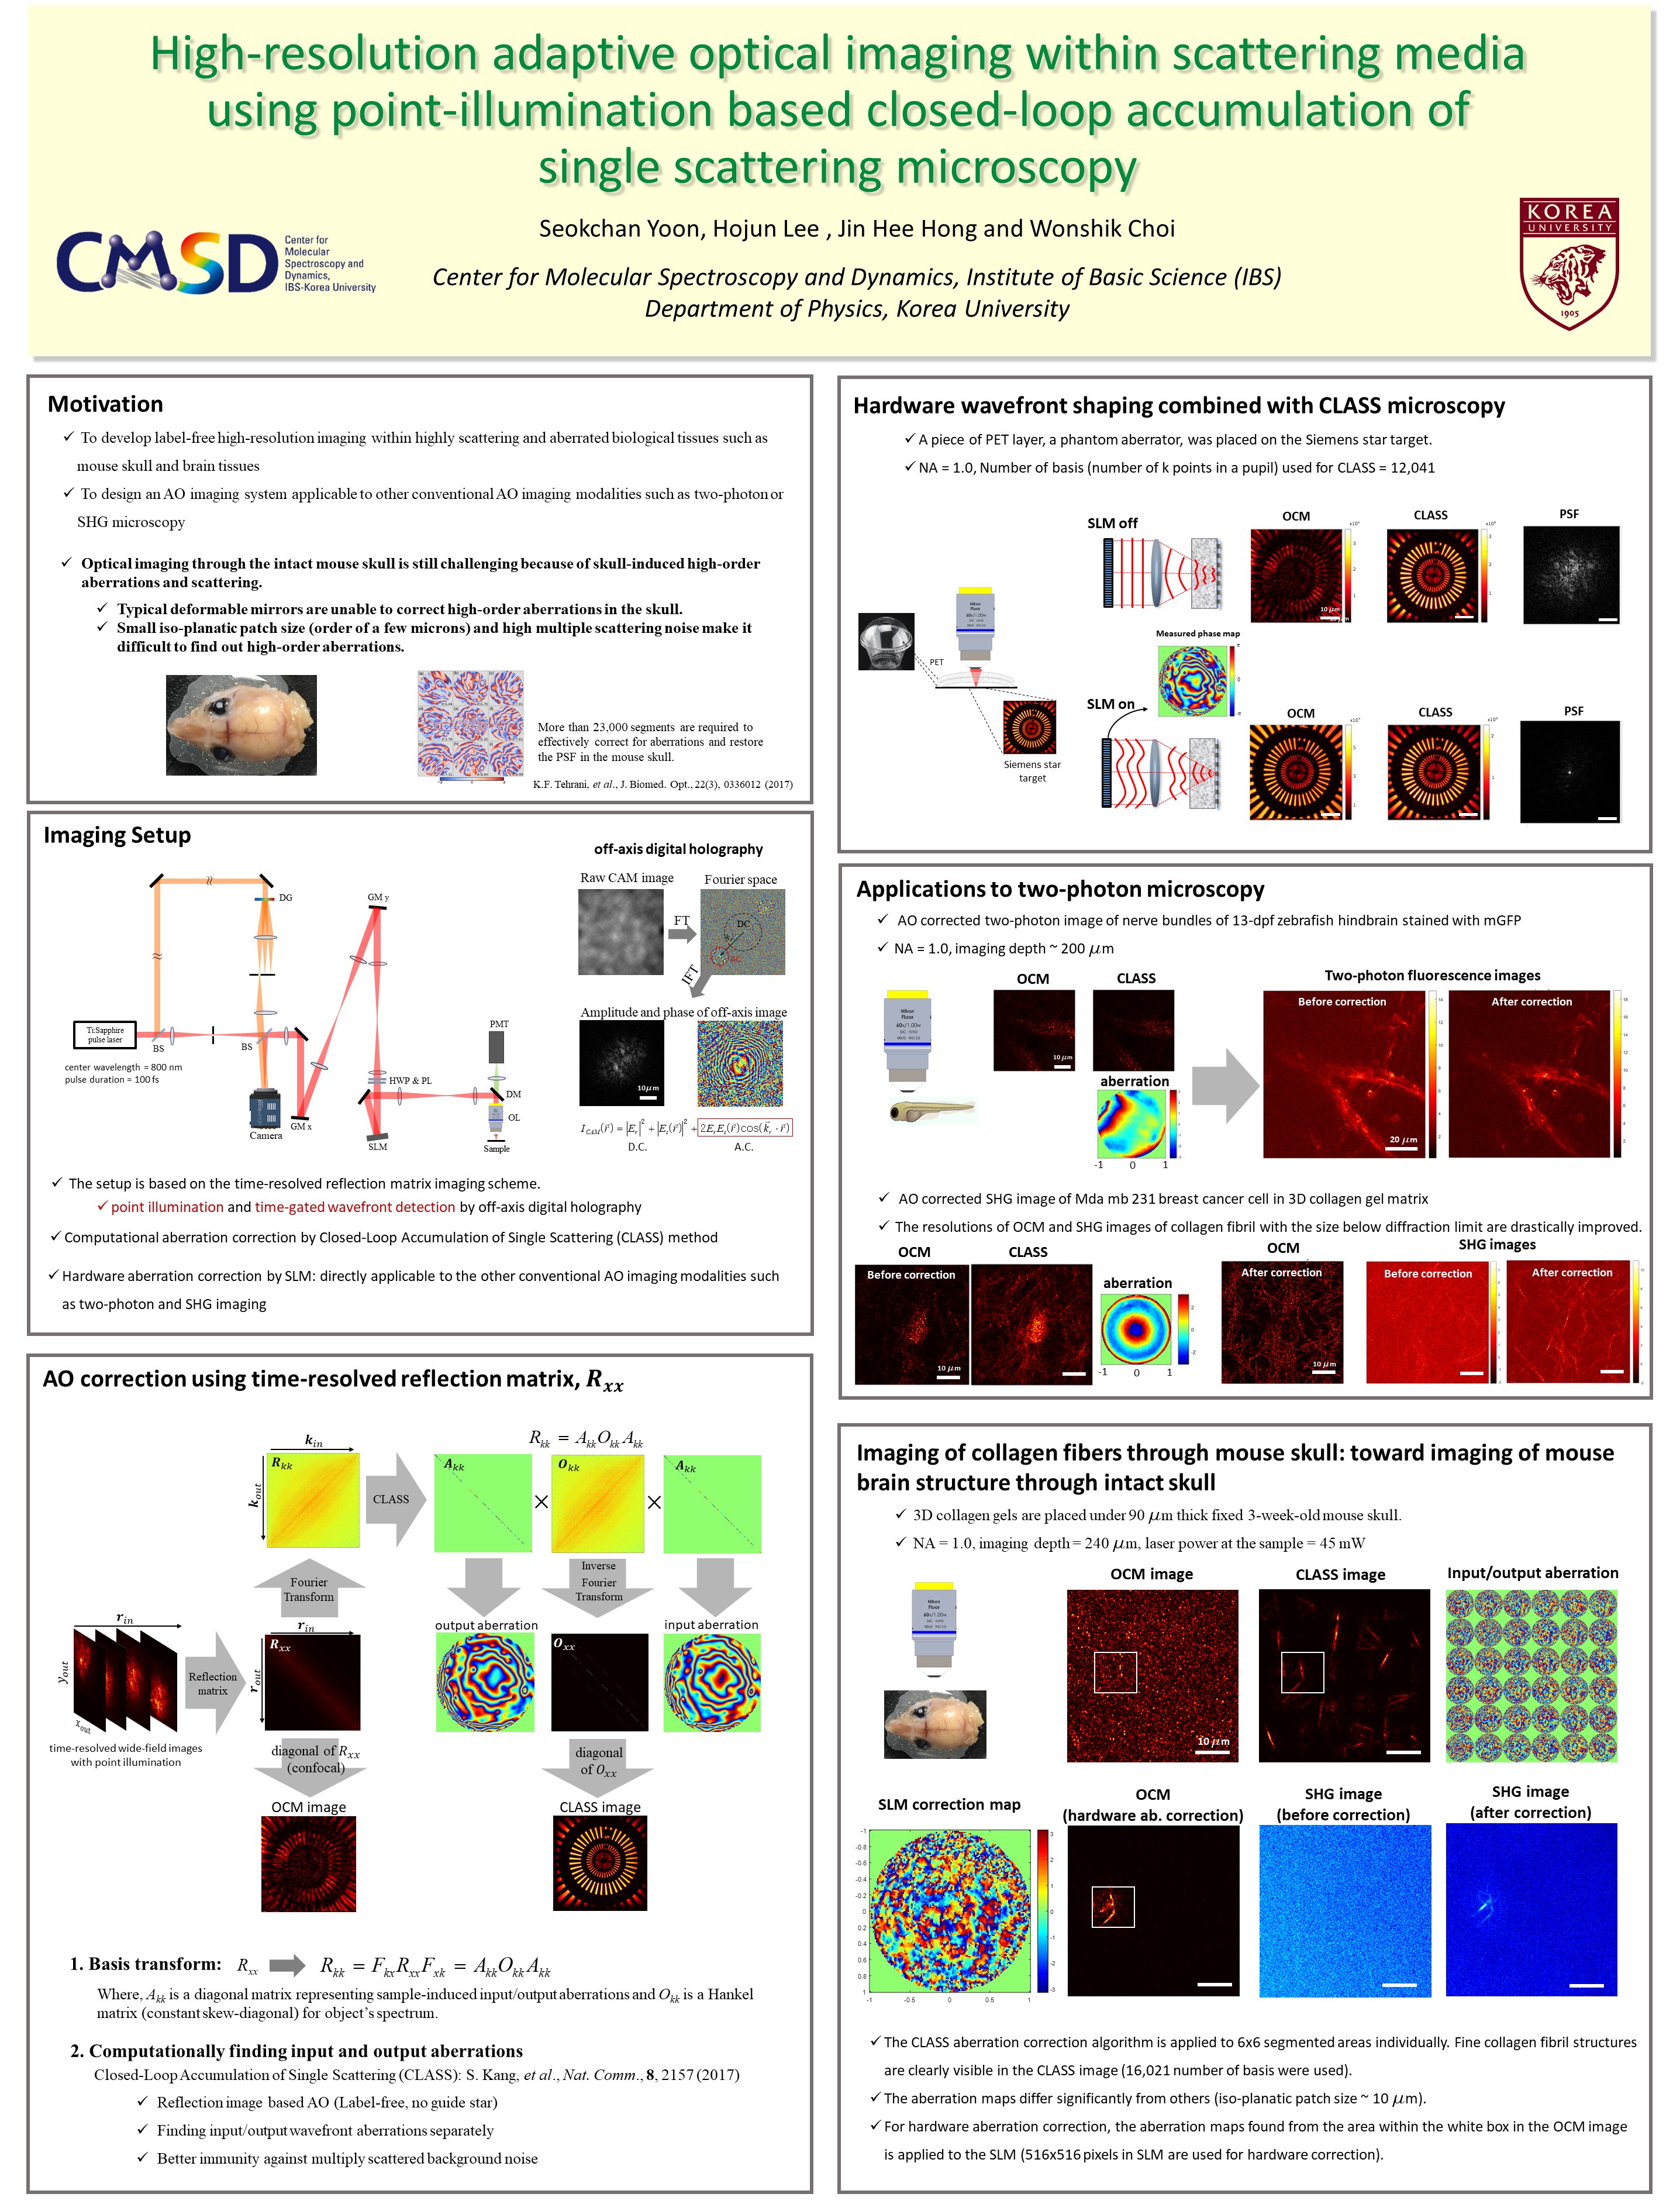 High-resolution adaptive optical imaging within scattering media using point-illumination based closed-loop accumulation of  single scattering microscopy 사진